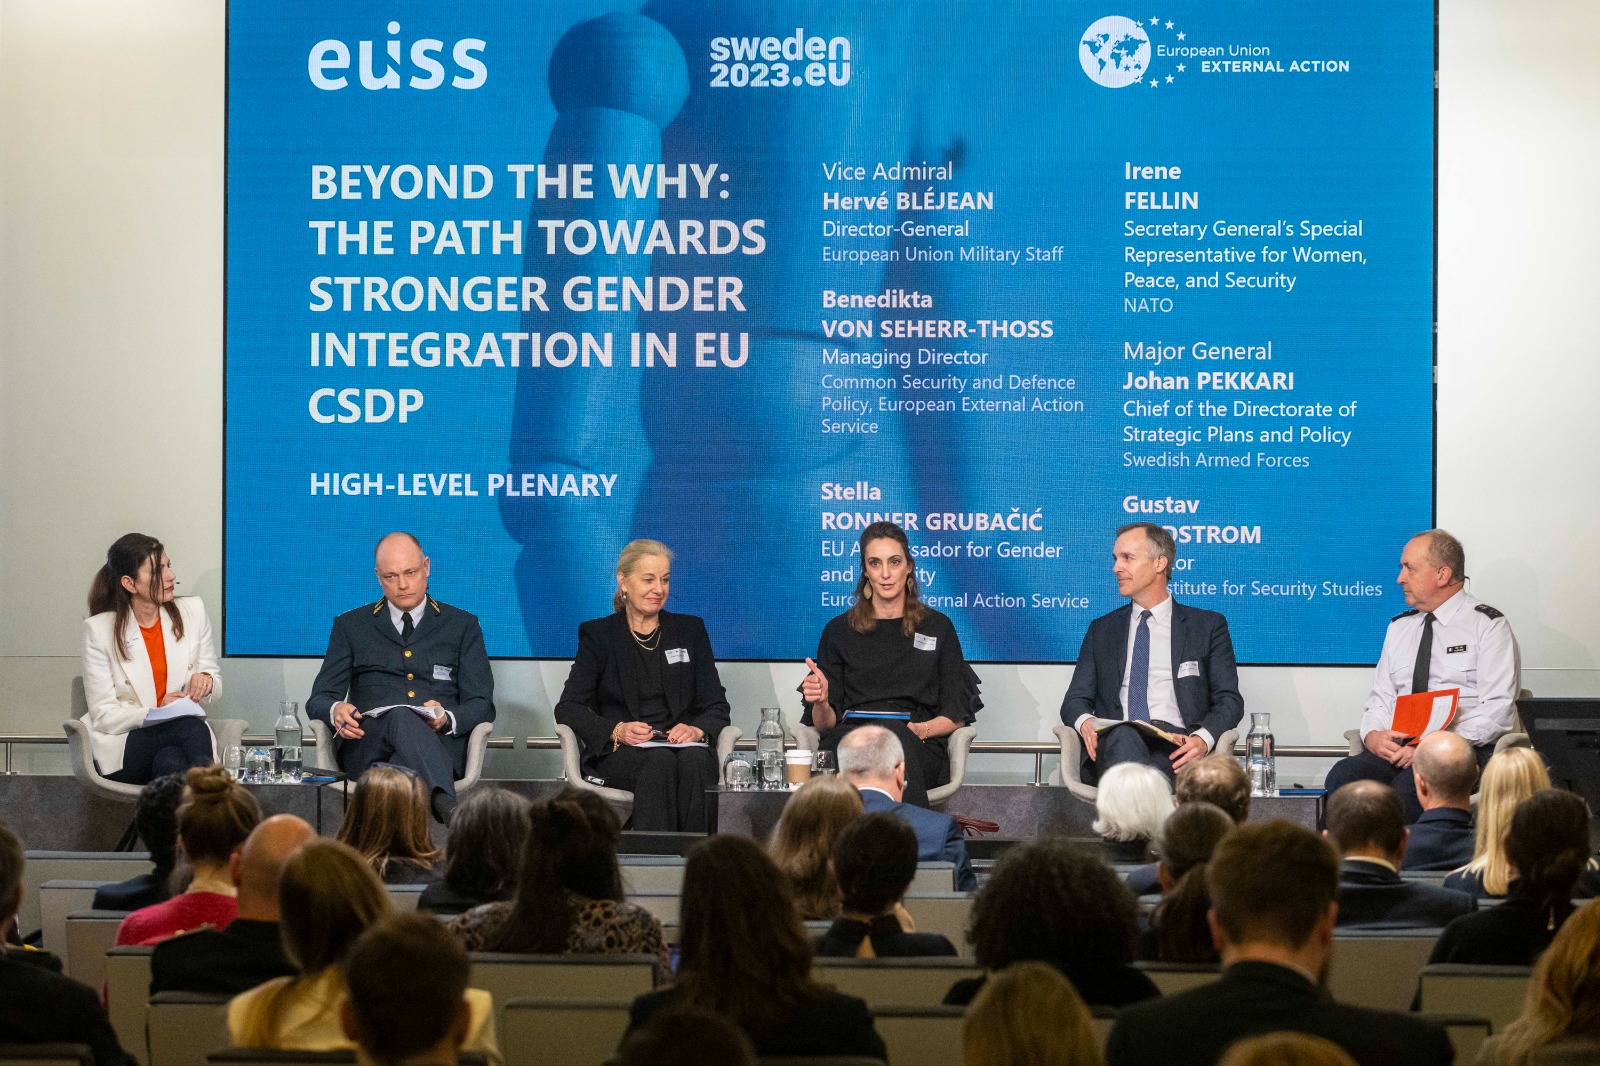 Panel members on a stage with background displaying the theme of the seminar ©EUISS